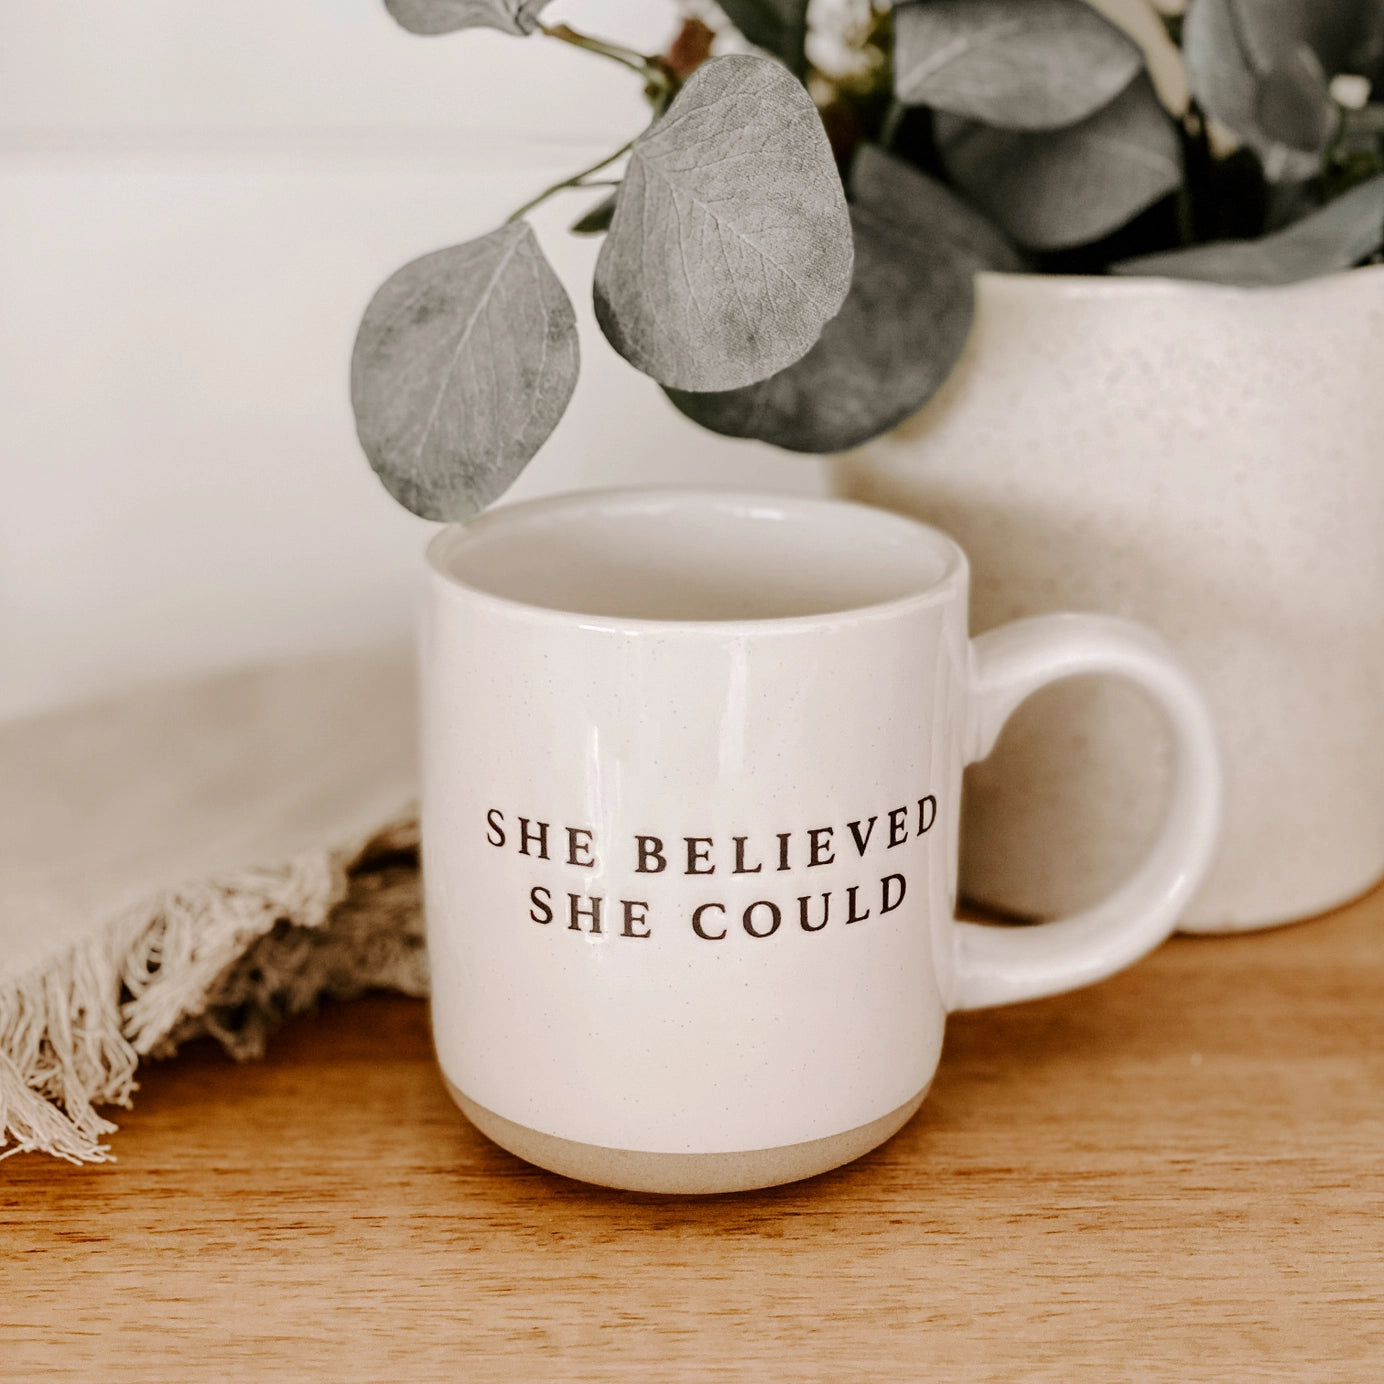 She Believed She Could Stoneware Coffee Mug - Decor & Gifts